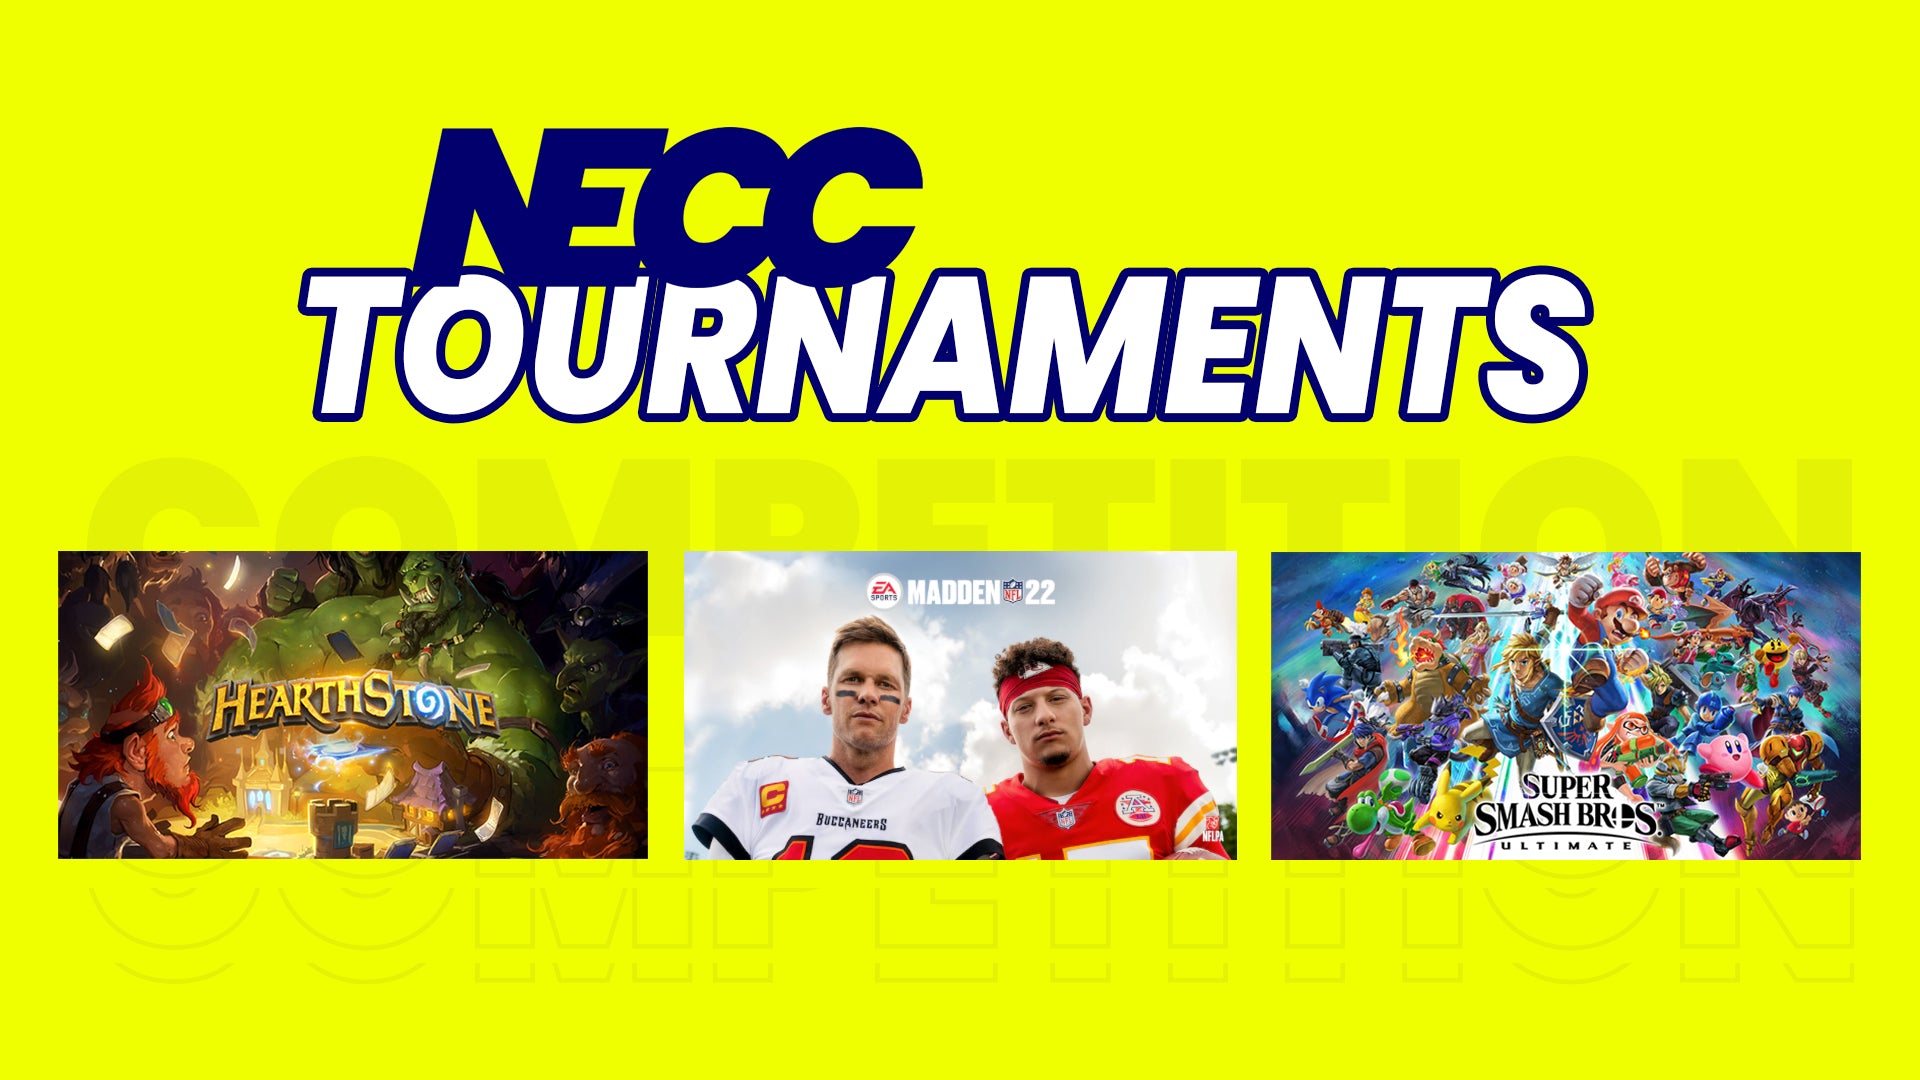 NECC Shares Details on Additional Tournaments and Prizing